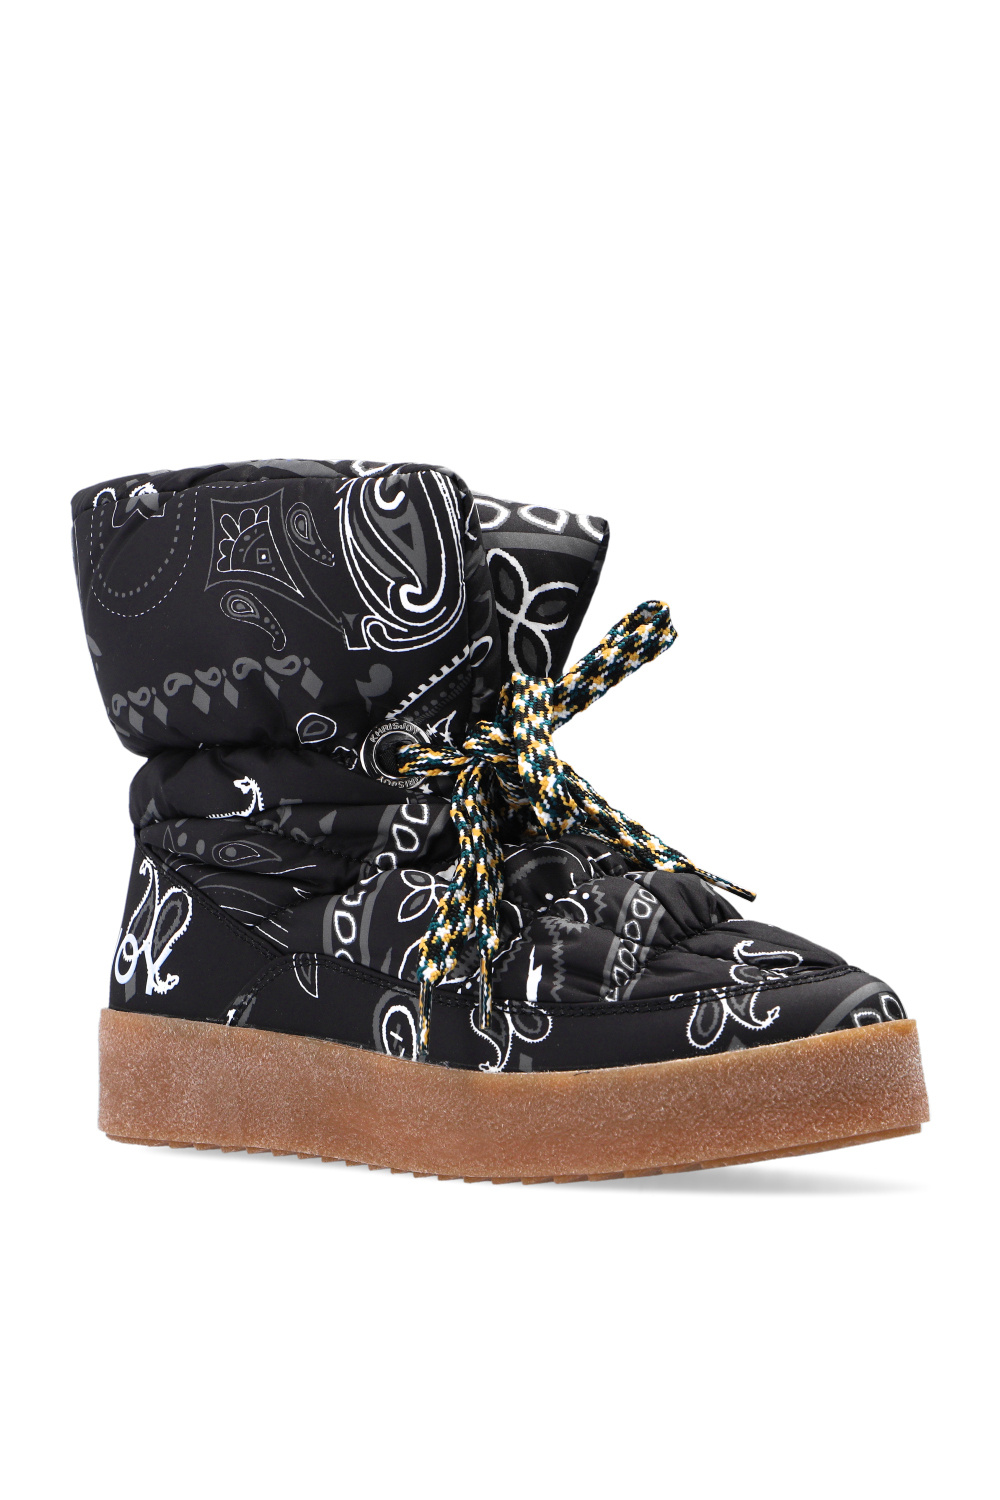 Khrisjoy Compliment any casual or formal look wearing ® Stormy Boots